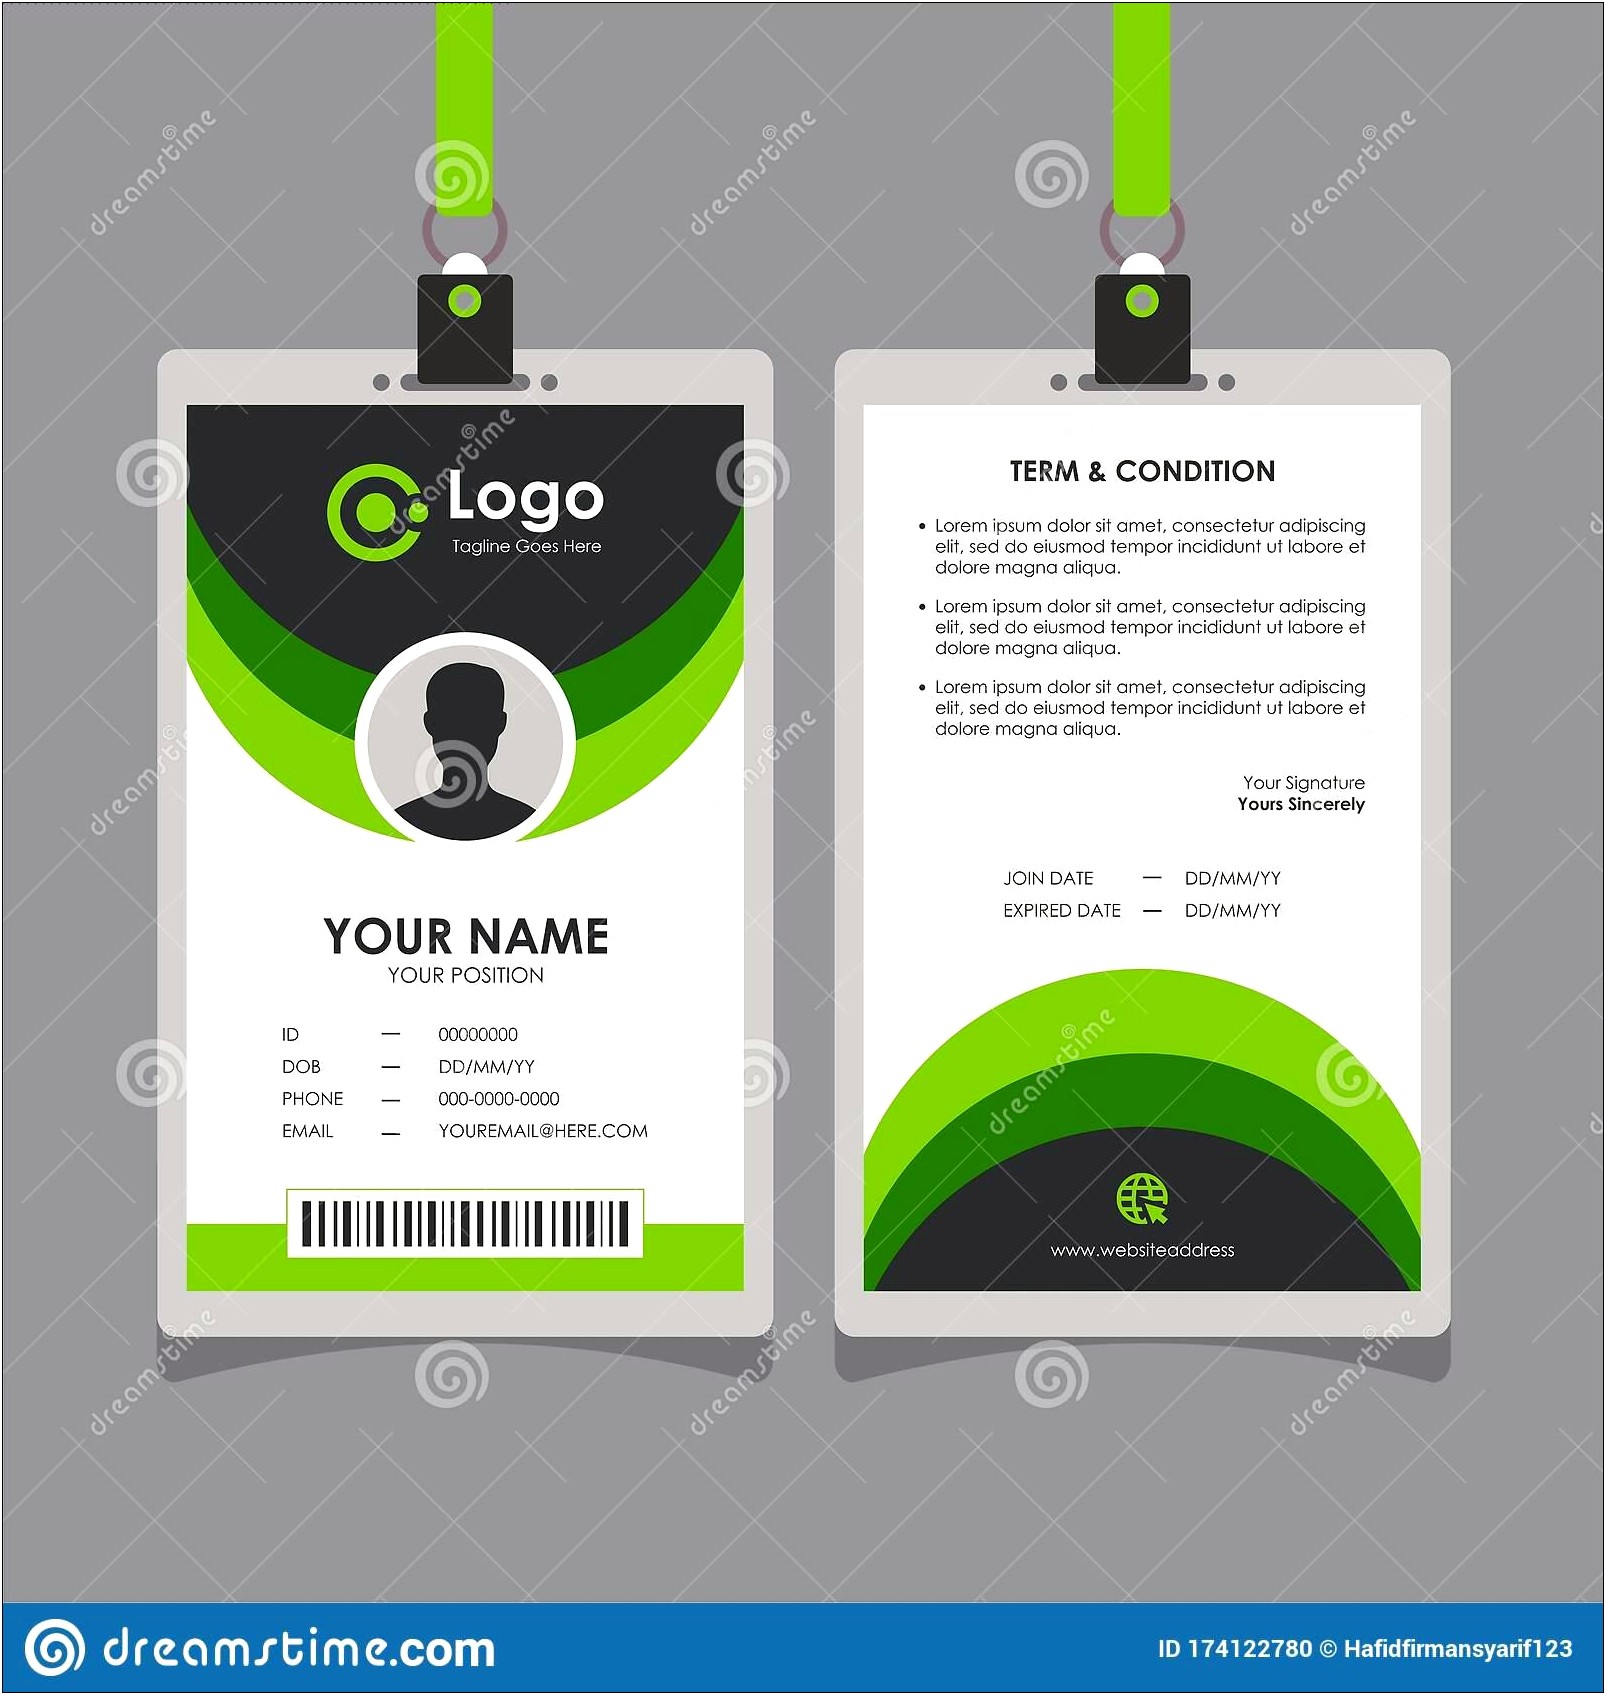 Employee Identification Card Template Free Download